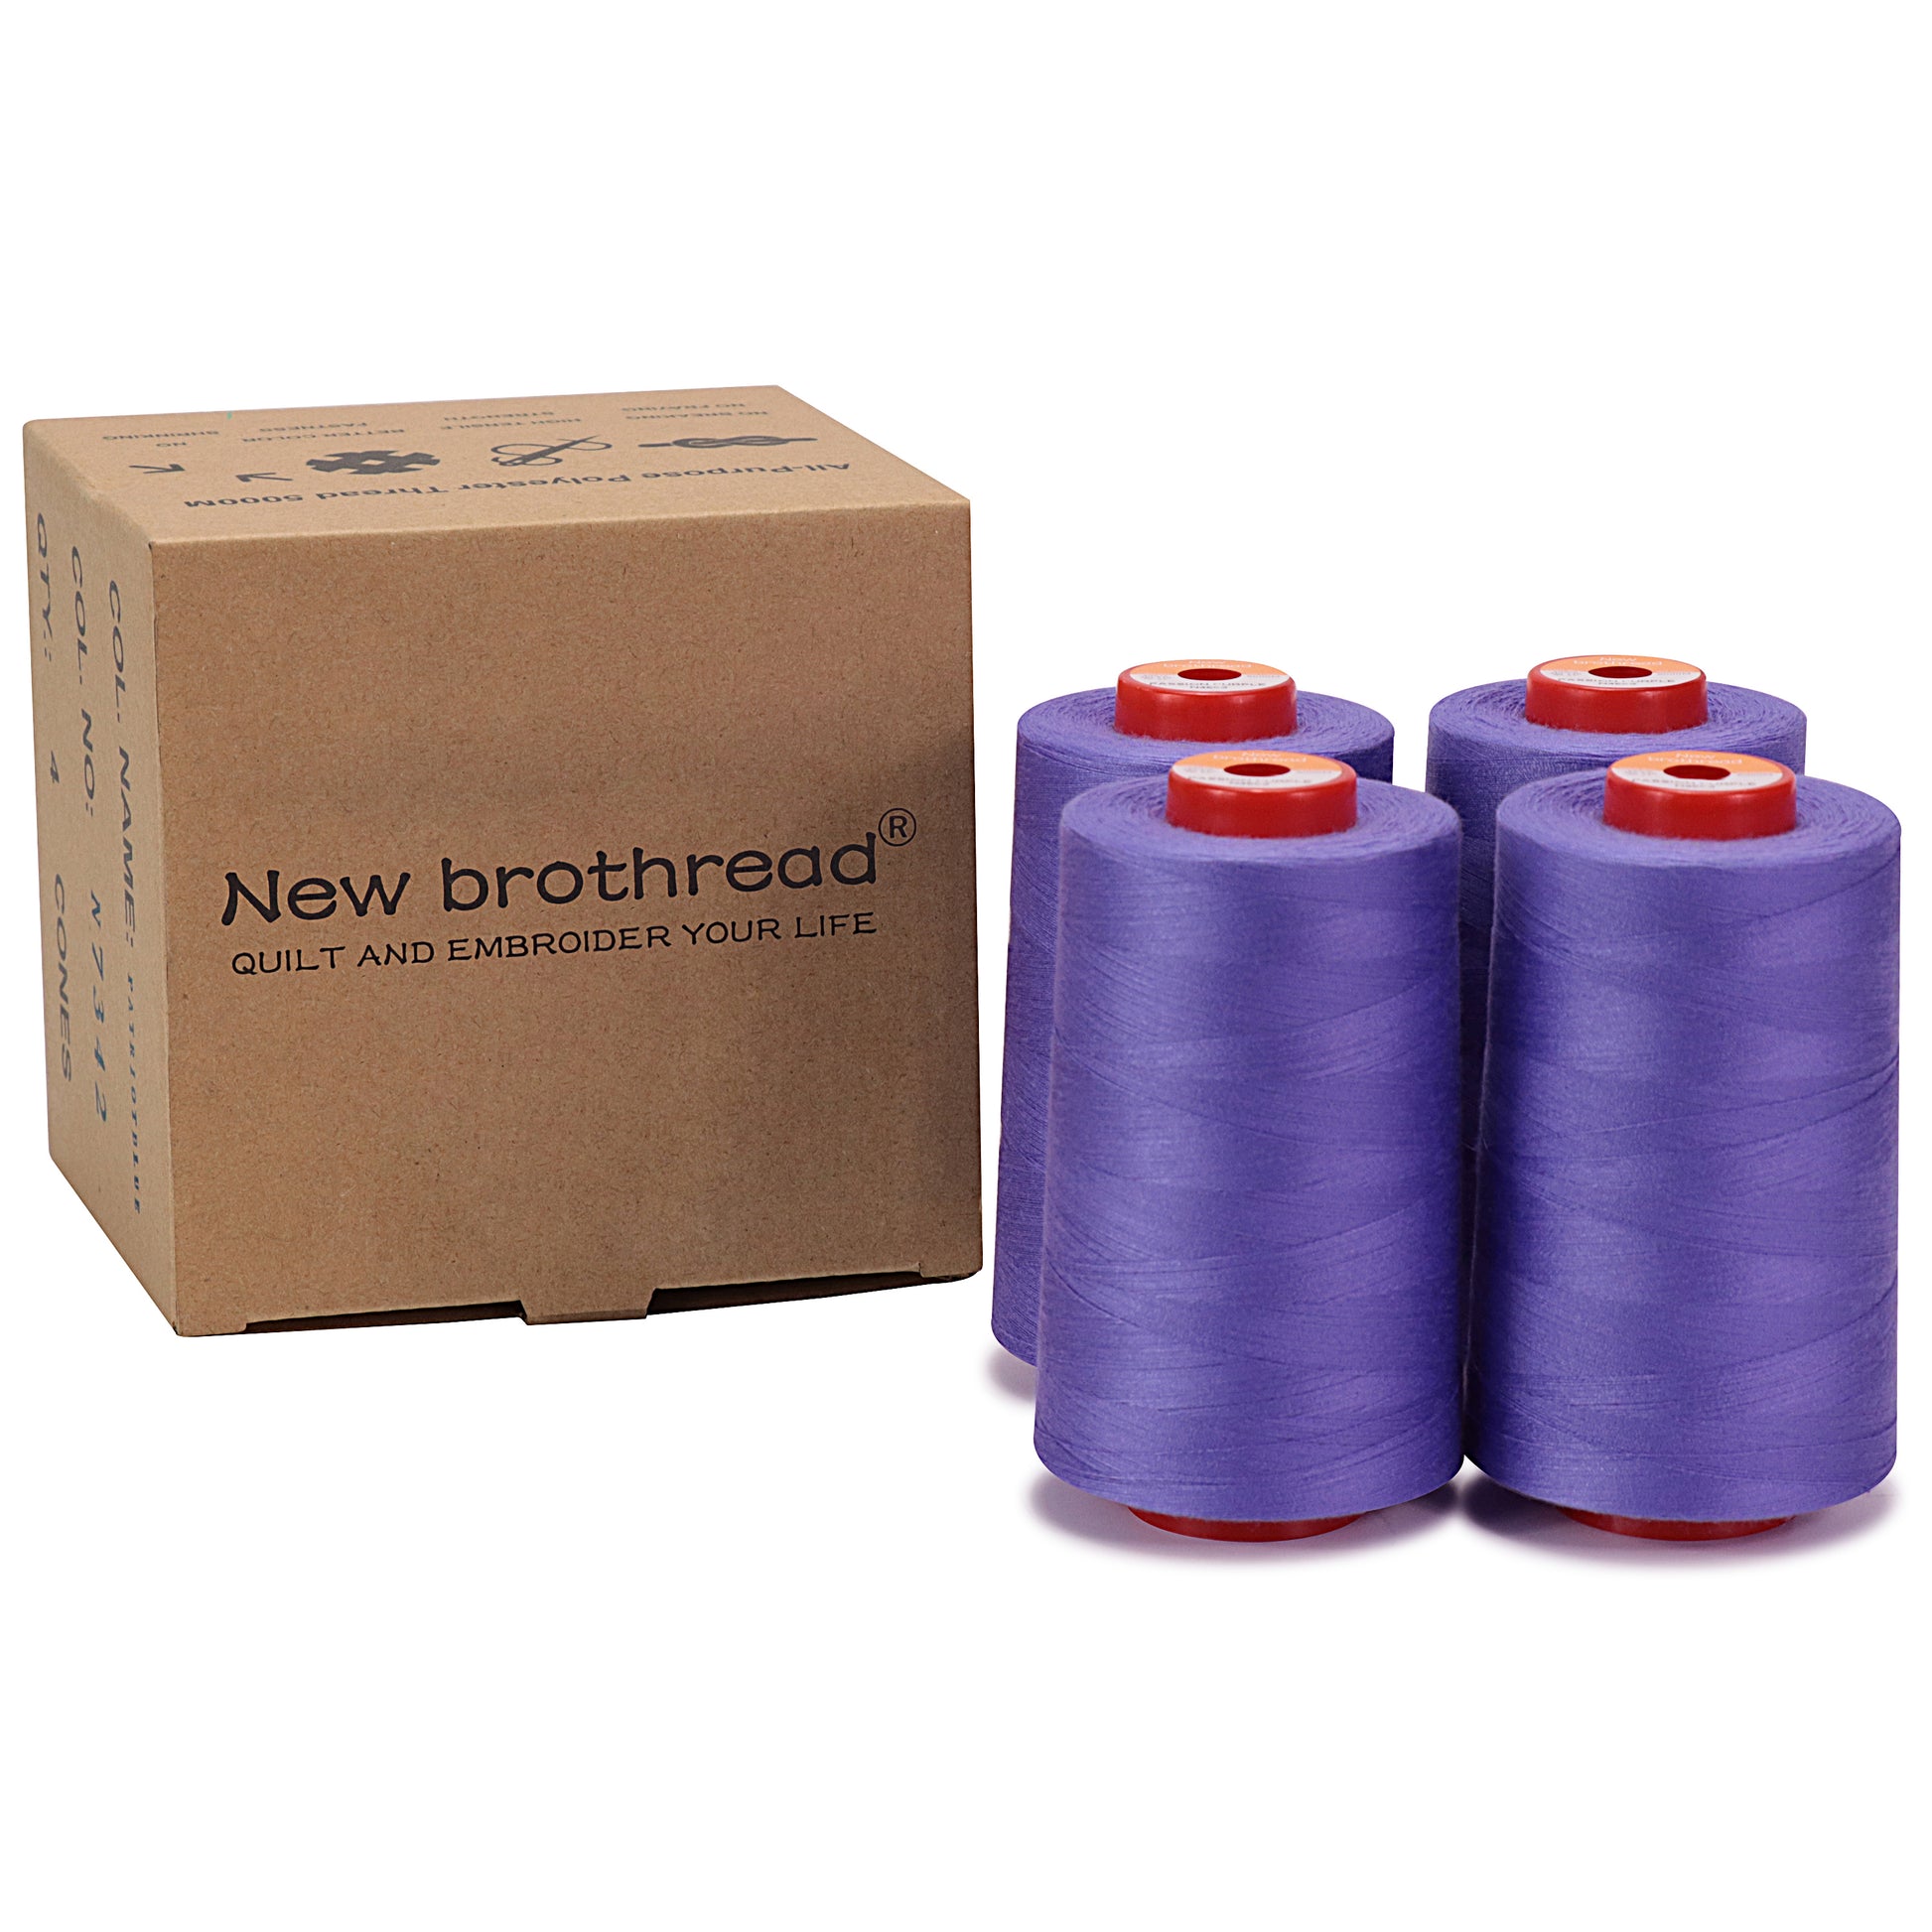 New brothread - 30 Options - Large Cones of 5500Y (5000M) Each All Pur